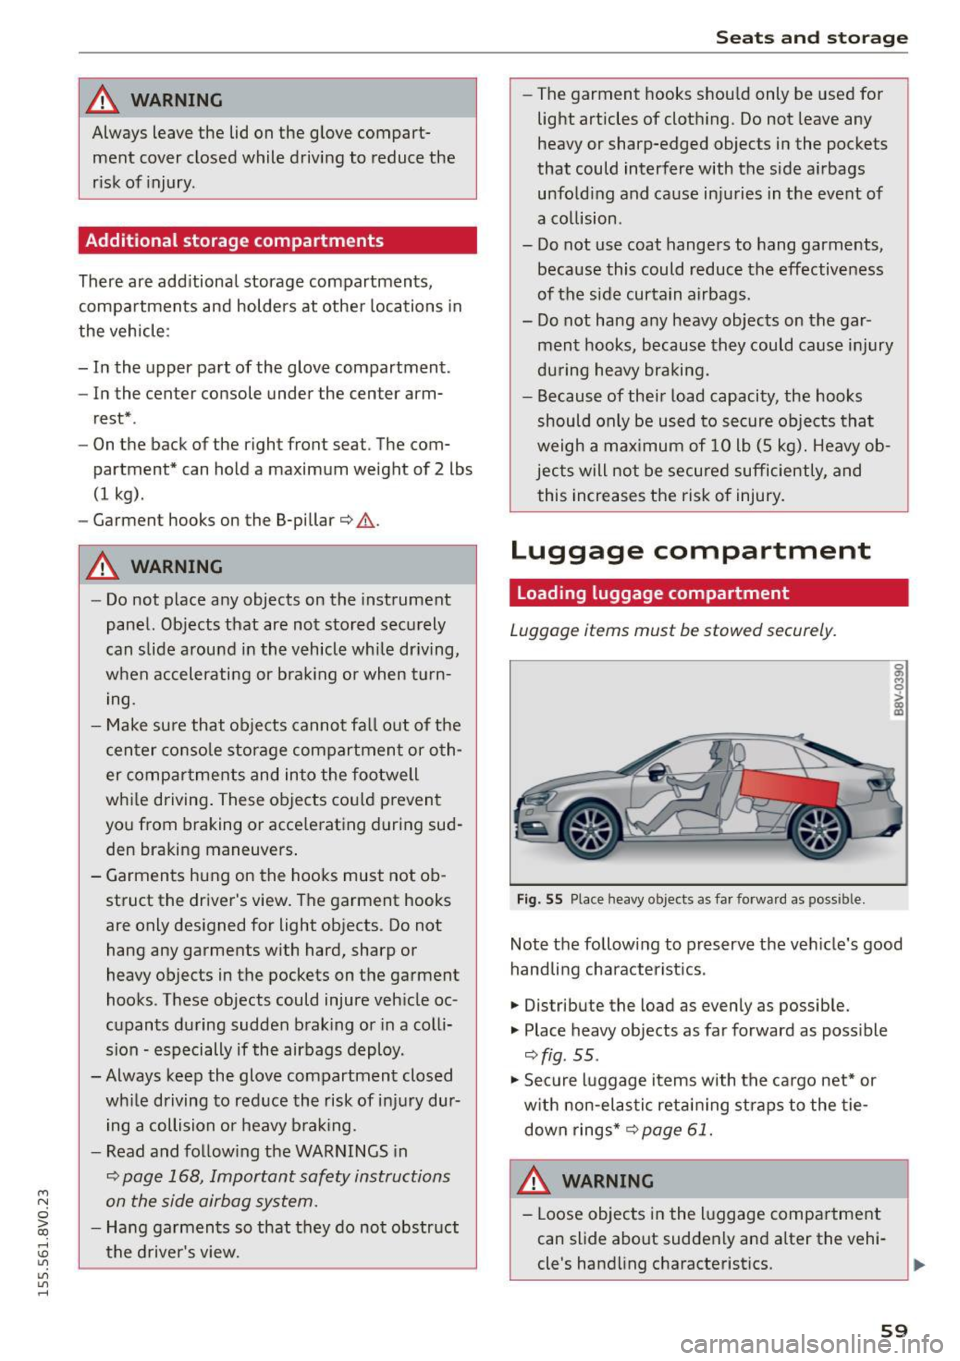 AUDI S3 SEDAN 2015  Owners Manual ...., 
N 
0 > co 
rl I.O 
" 
" 
" 
rl 
_& WARNING 
Always  leave  the  lid on  the  glove  compart­ment  cover  closed  while  driving  to  reduce the 
risk  of  injury. 
Additional  storage  comp